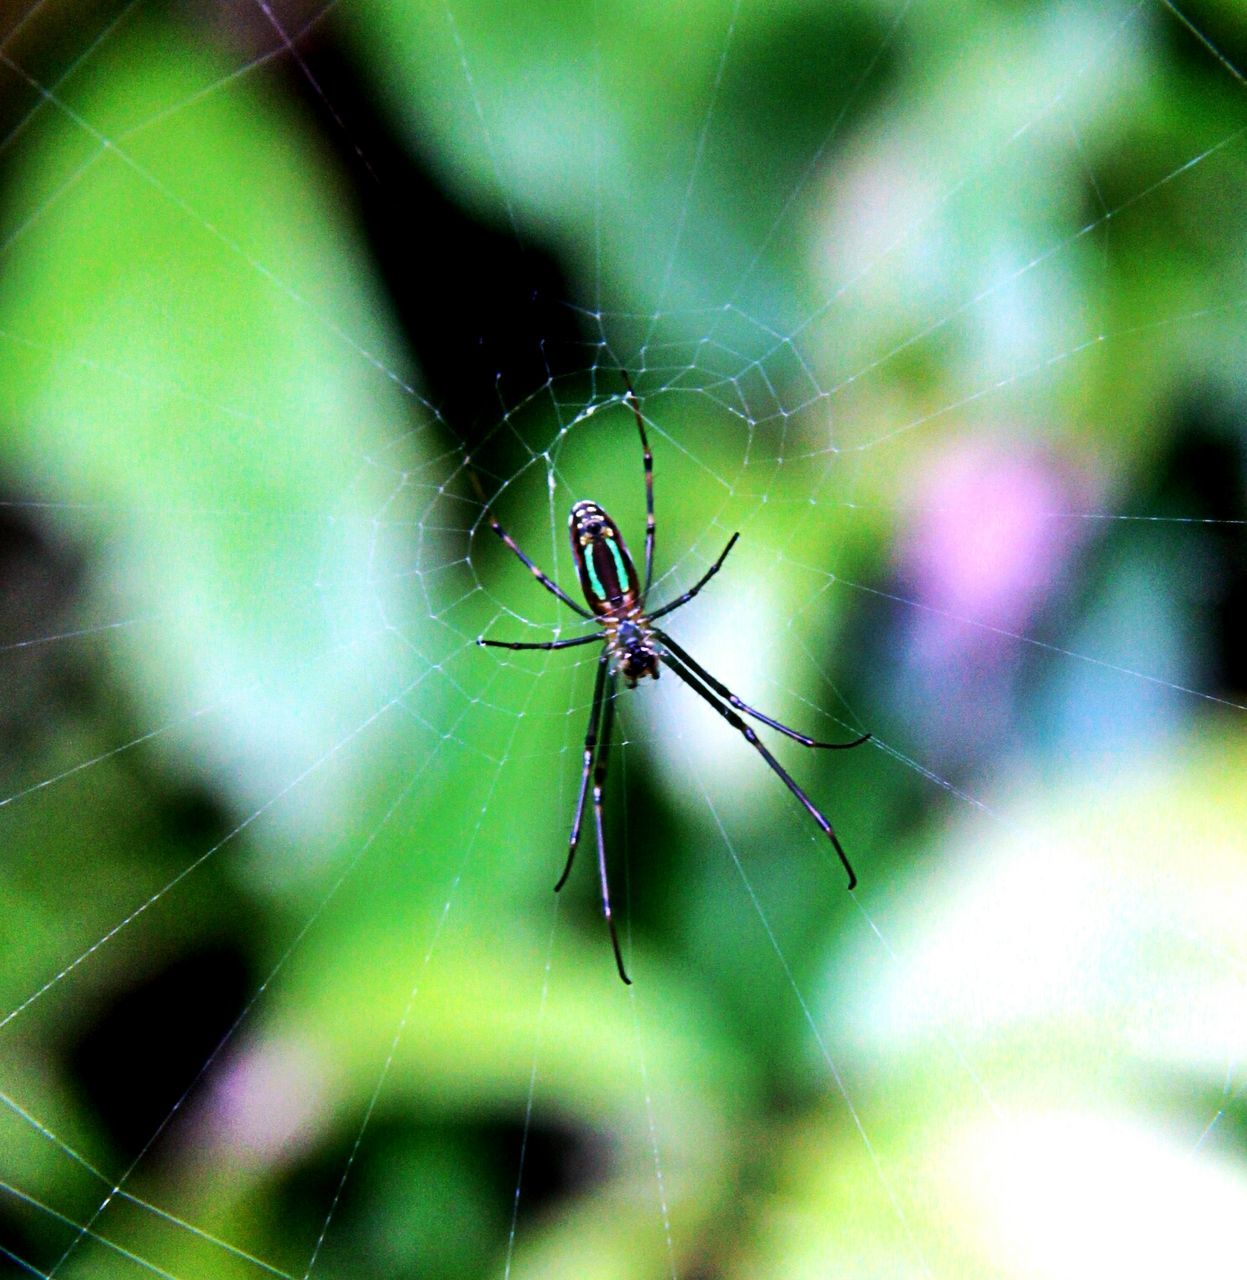 insect, one animal, animal themes, animals in the wild, wildlife, spider, spider web, focus on foreground, close-up, dragonfly, selective focus, nature, full length, day, outdoors, green color, no people, web, invertebrate